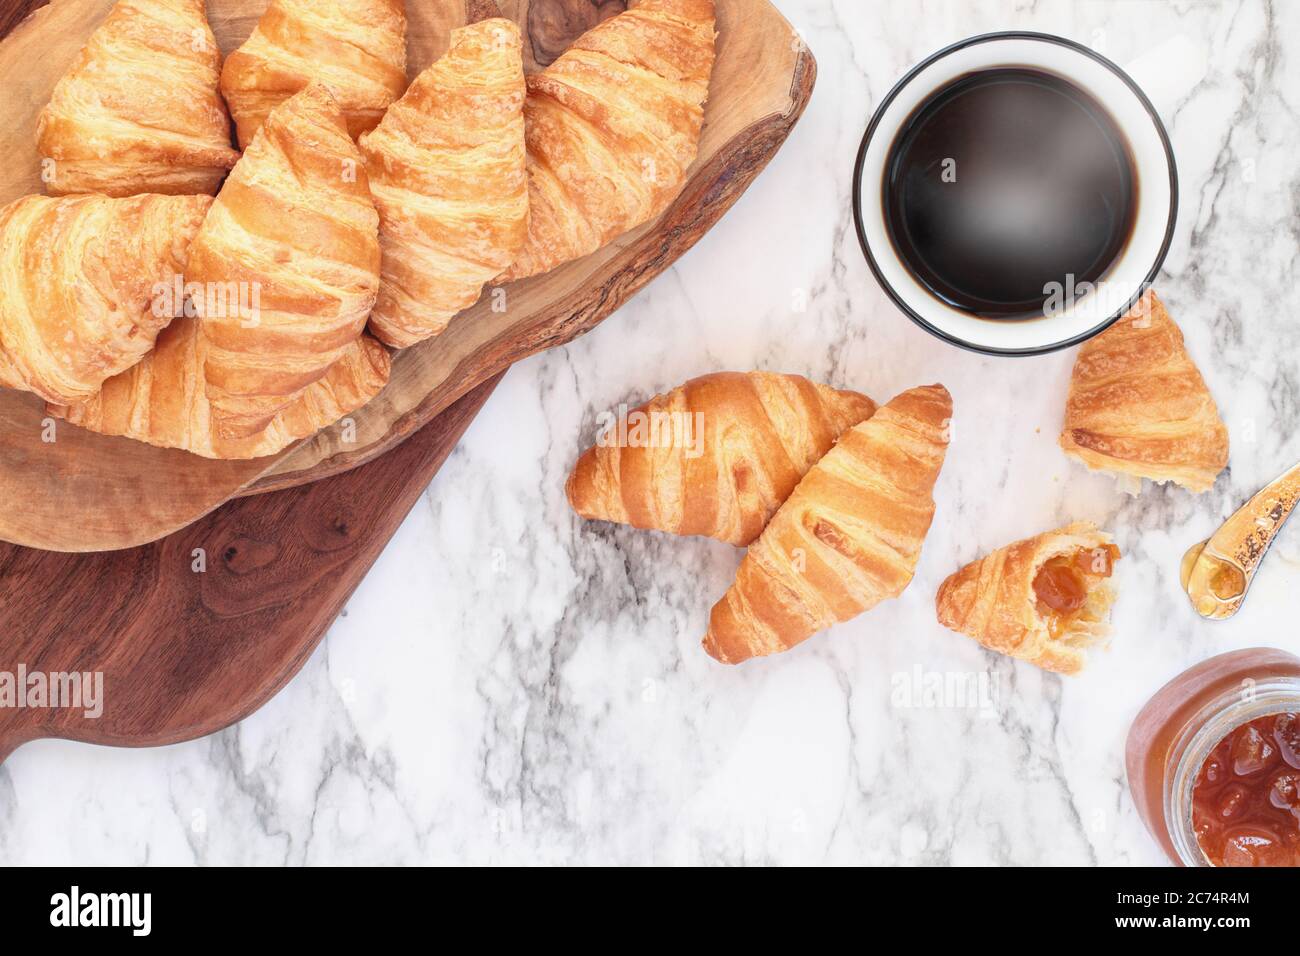 Fresh homemade croissants or crescent rolls with jam and a cup of coffee over marble background  Image shot from top view. Stock Photo